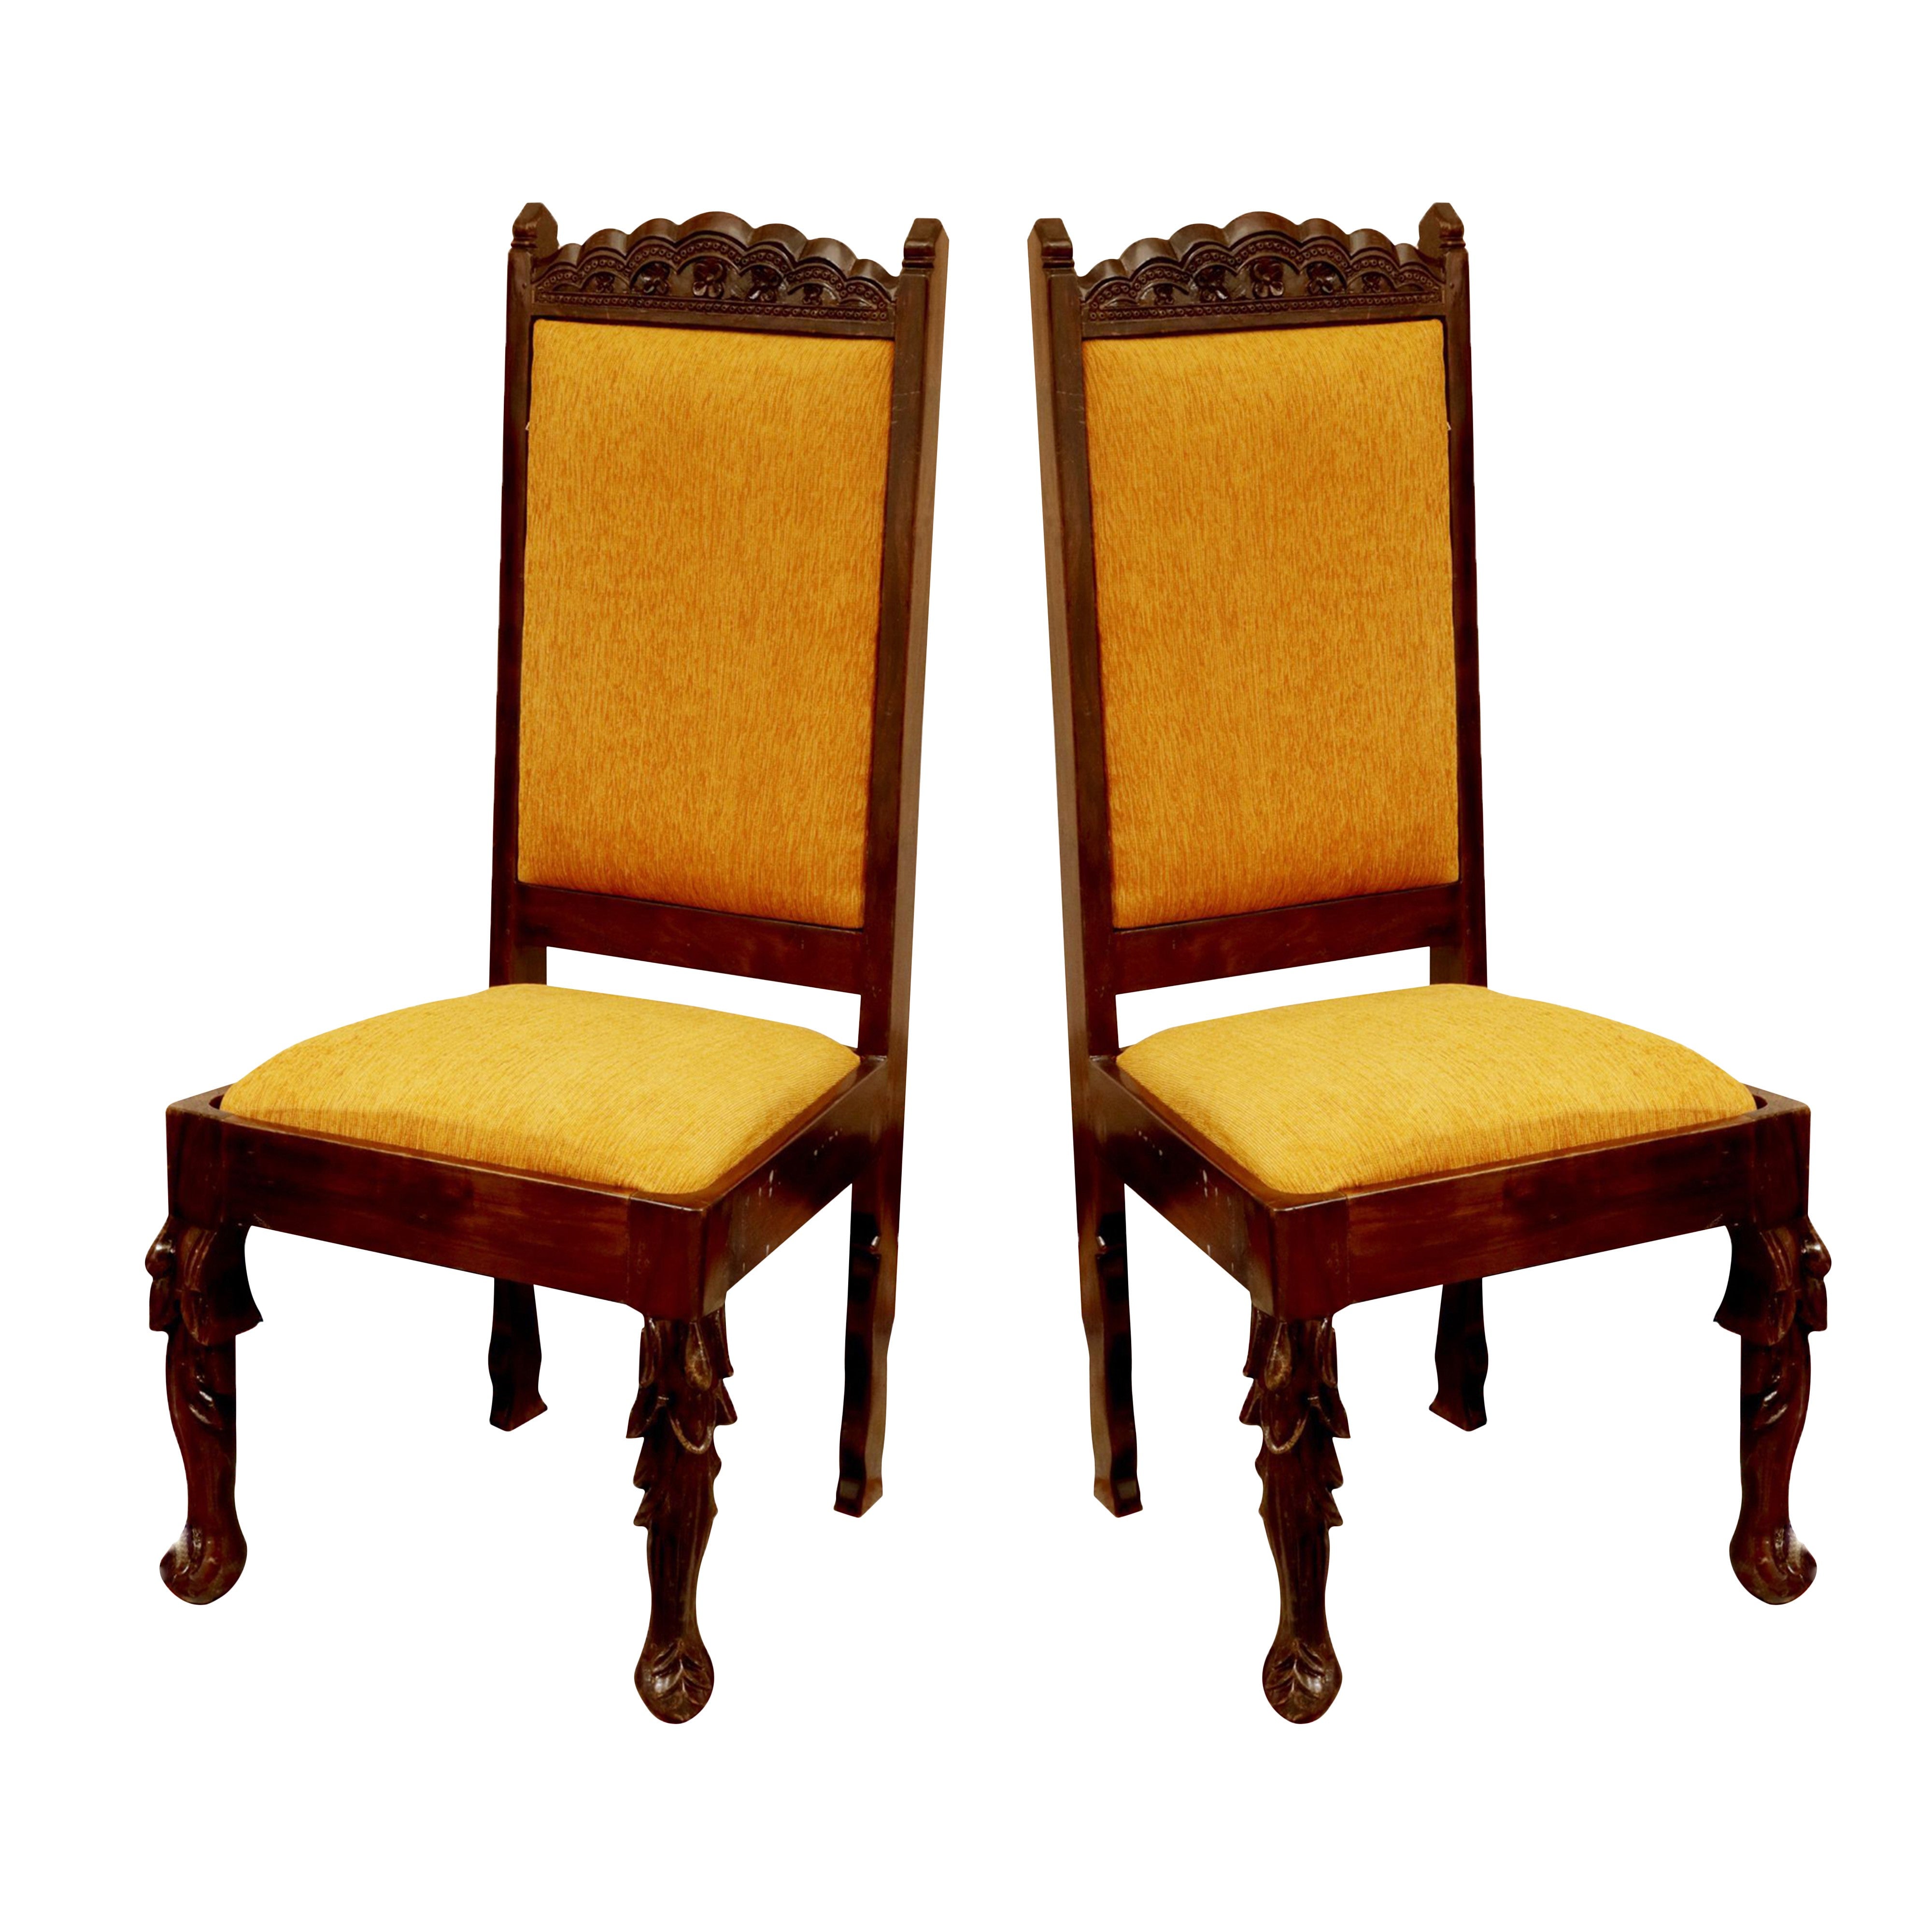 (Set of 2) Regal Style Chair Dining Chair